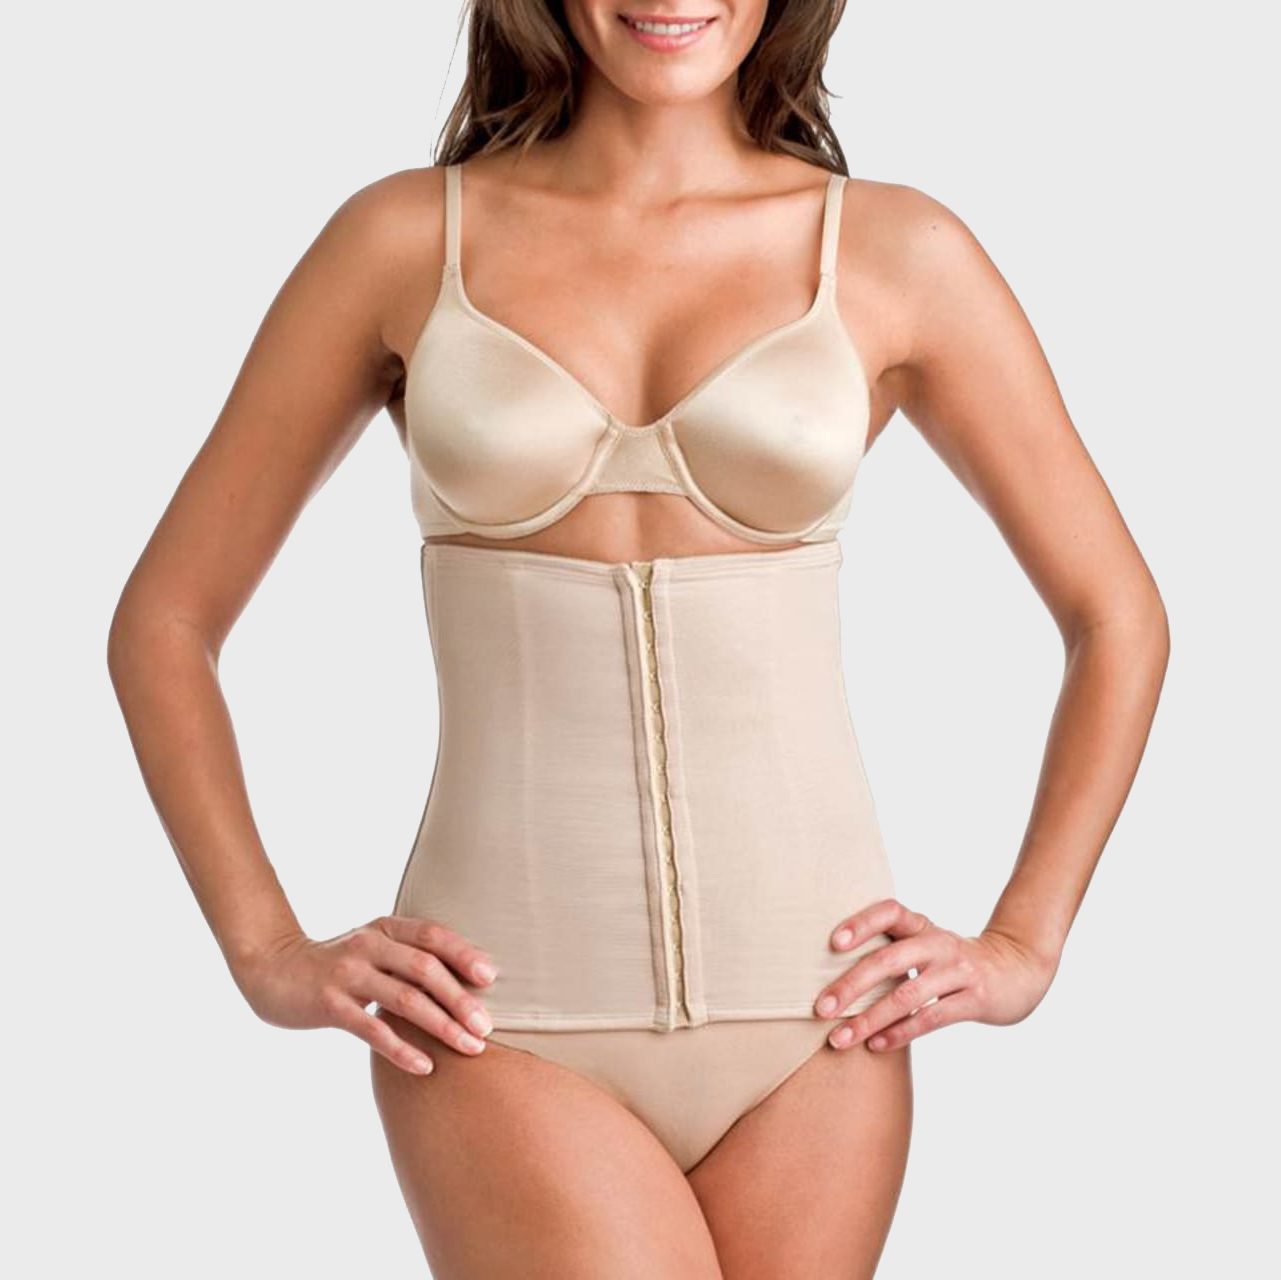 Hip Shapewear - The Best Shapewear for Hips & Thighs - Bare Necessities